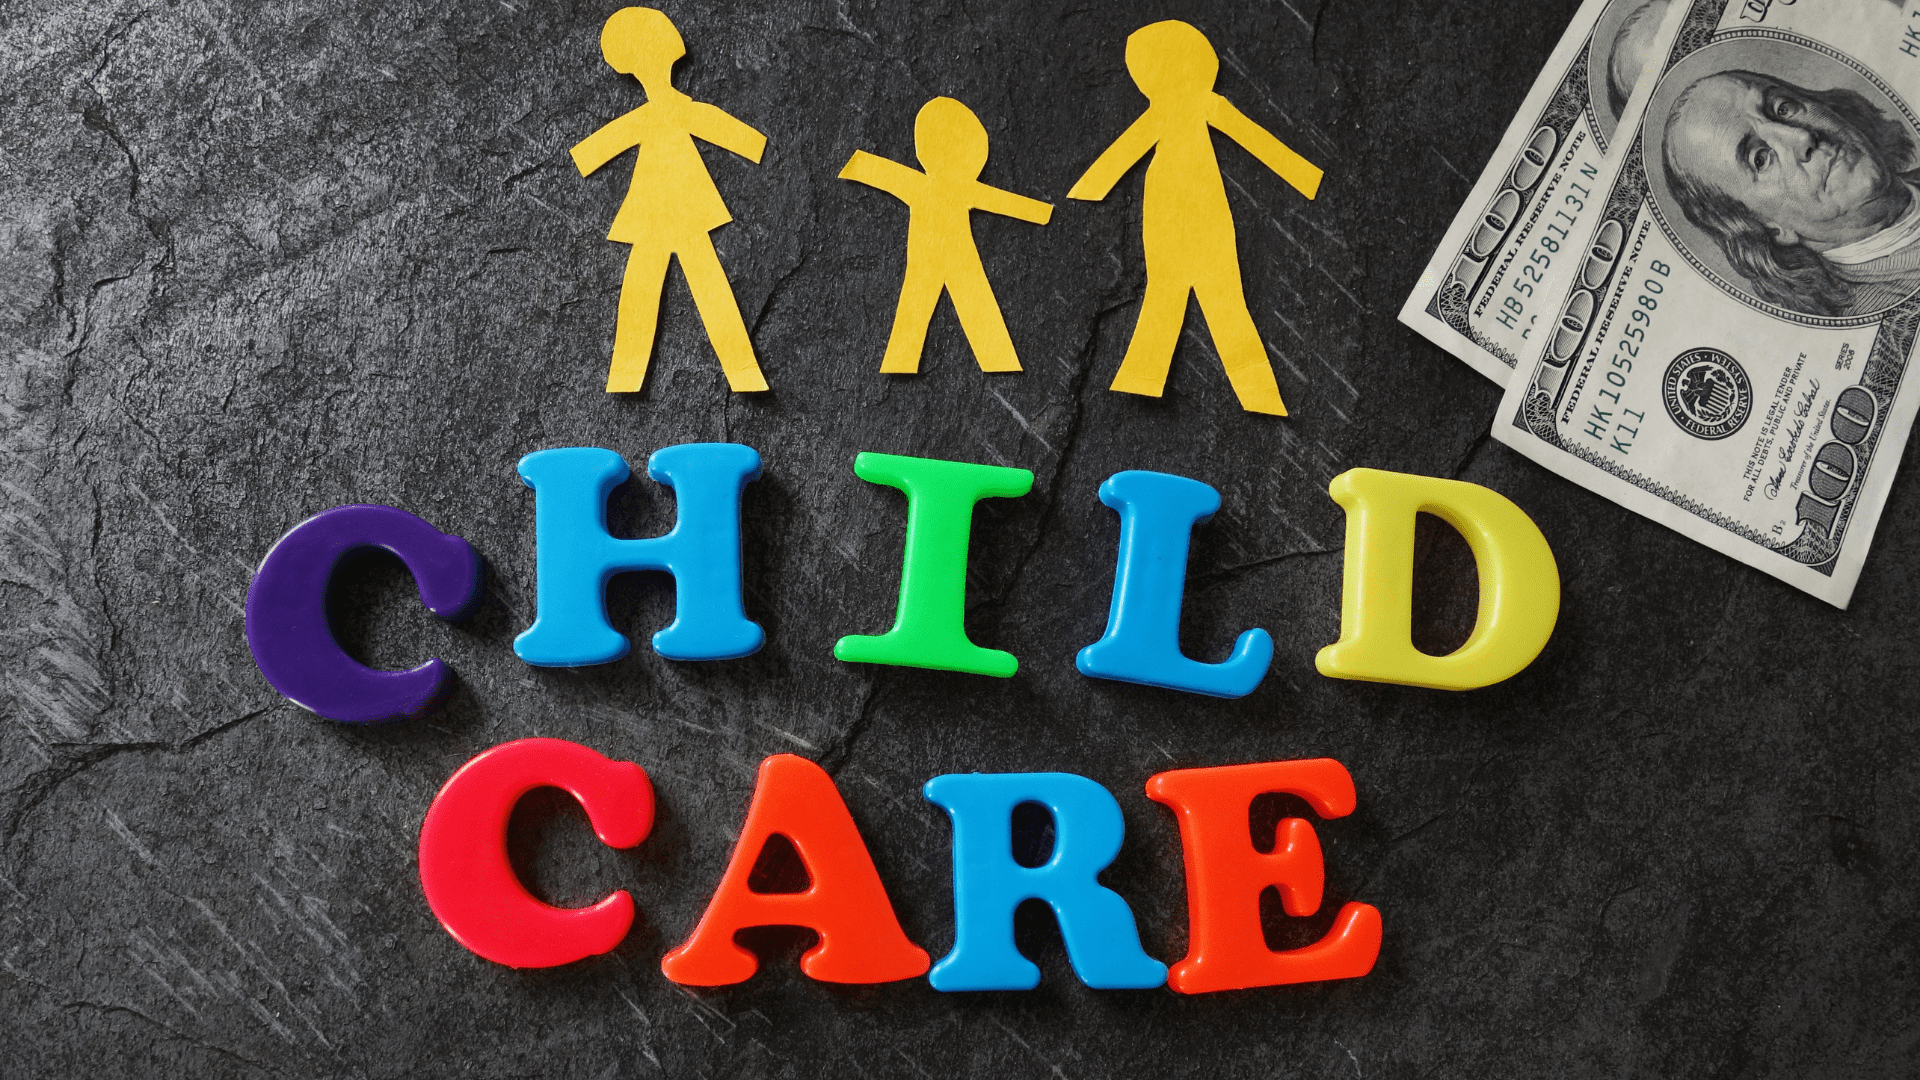 Featured image for “Del. child care worker registry open; $1,000 bonuses going out”